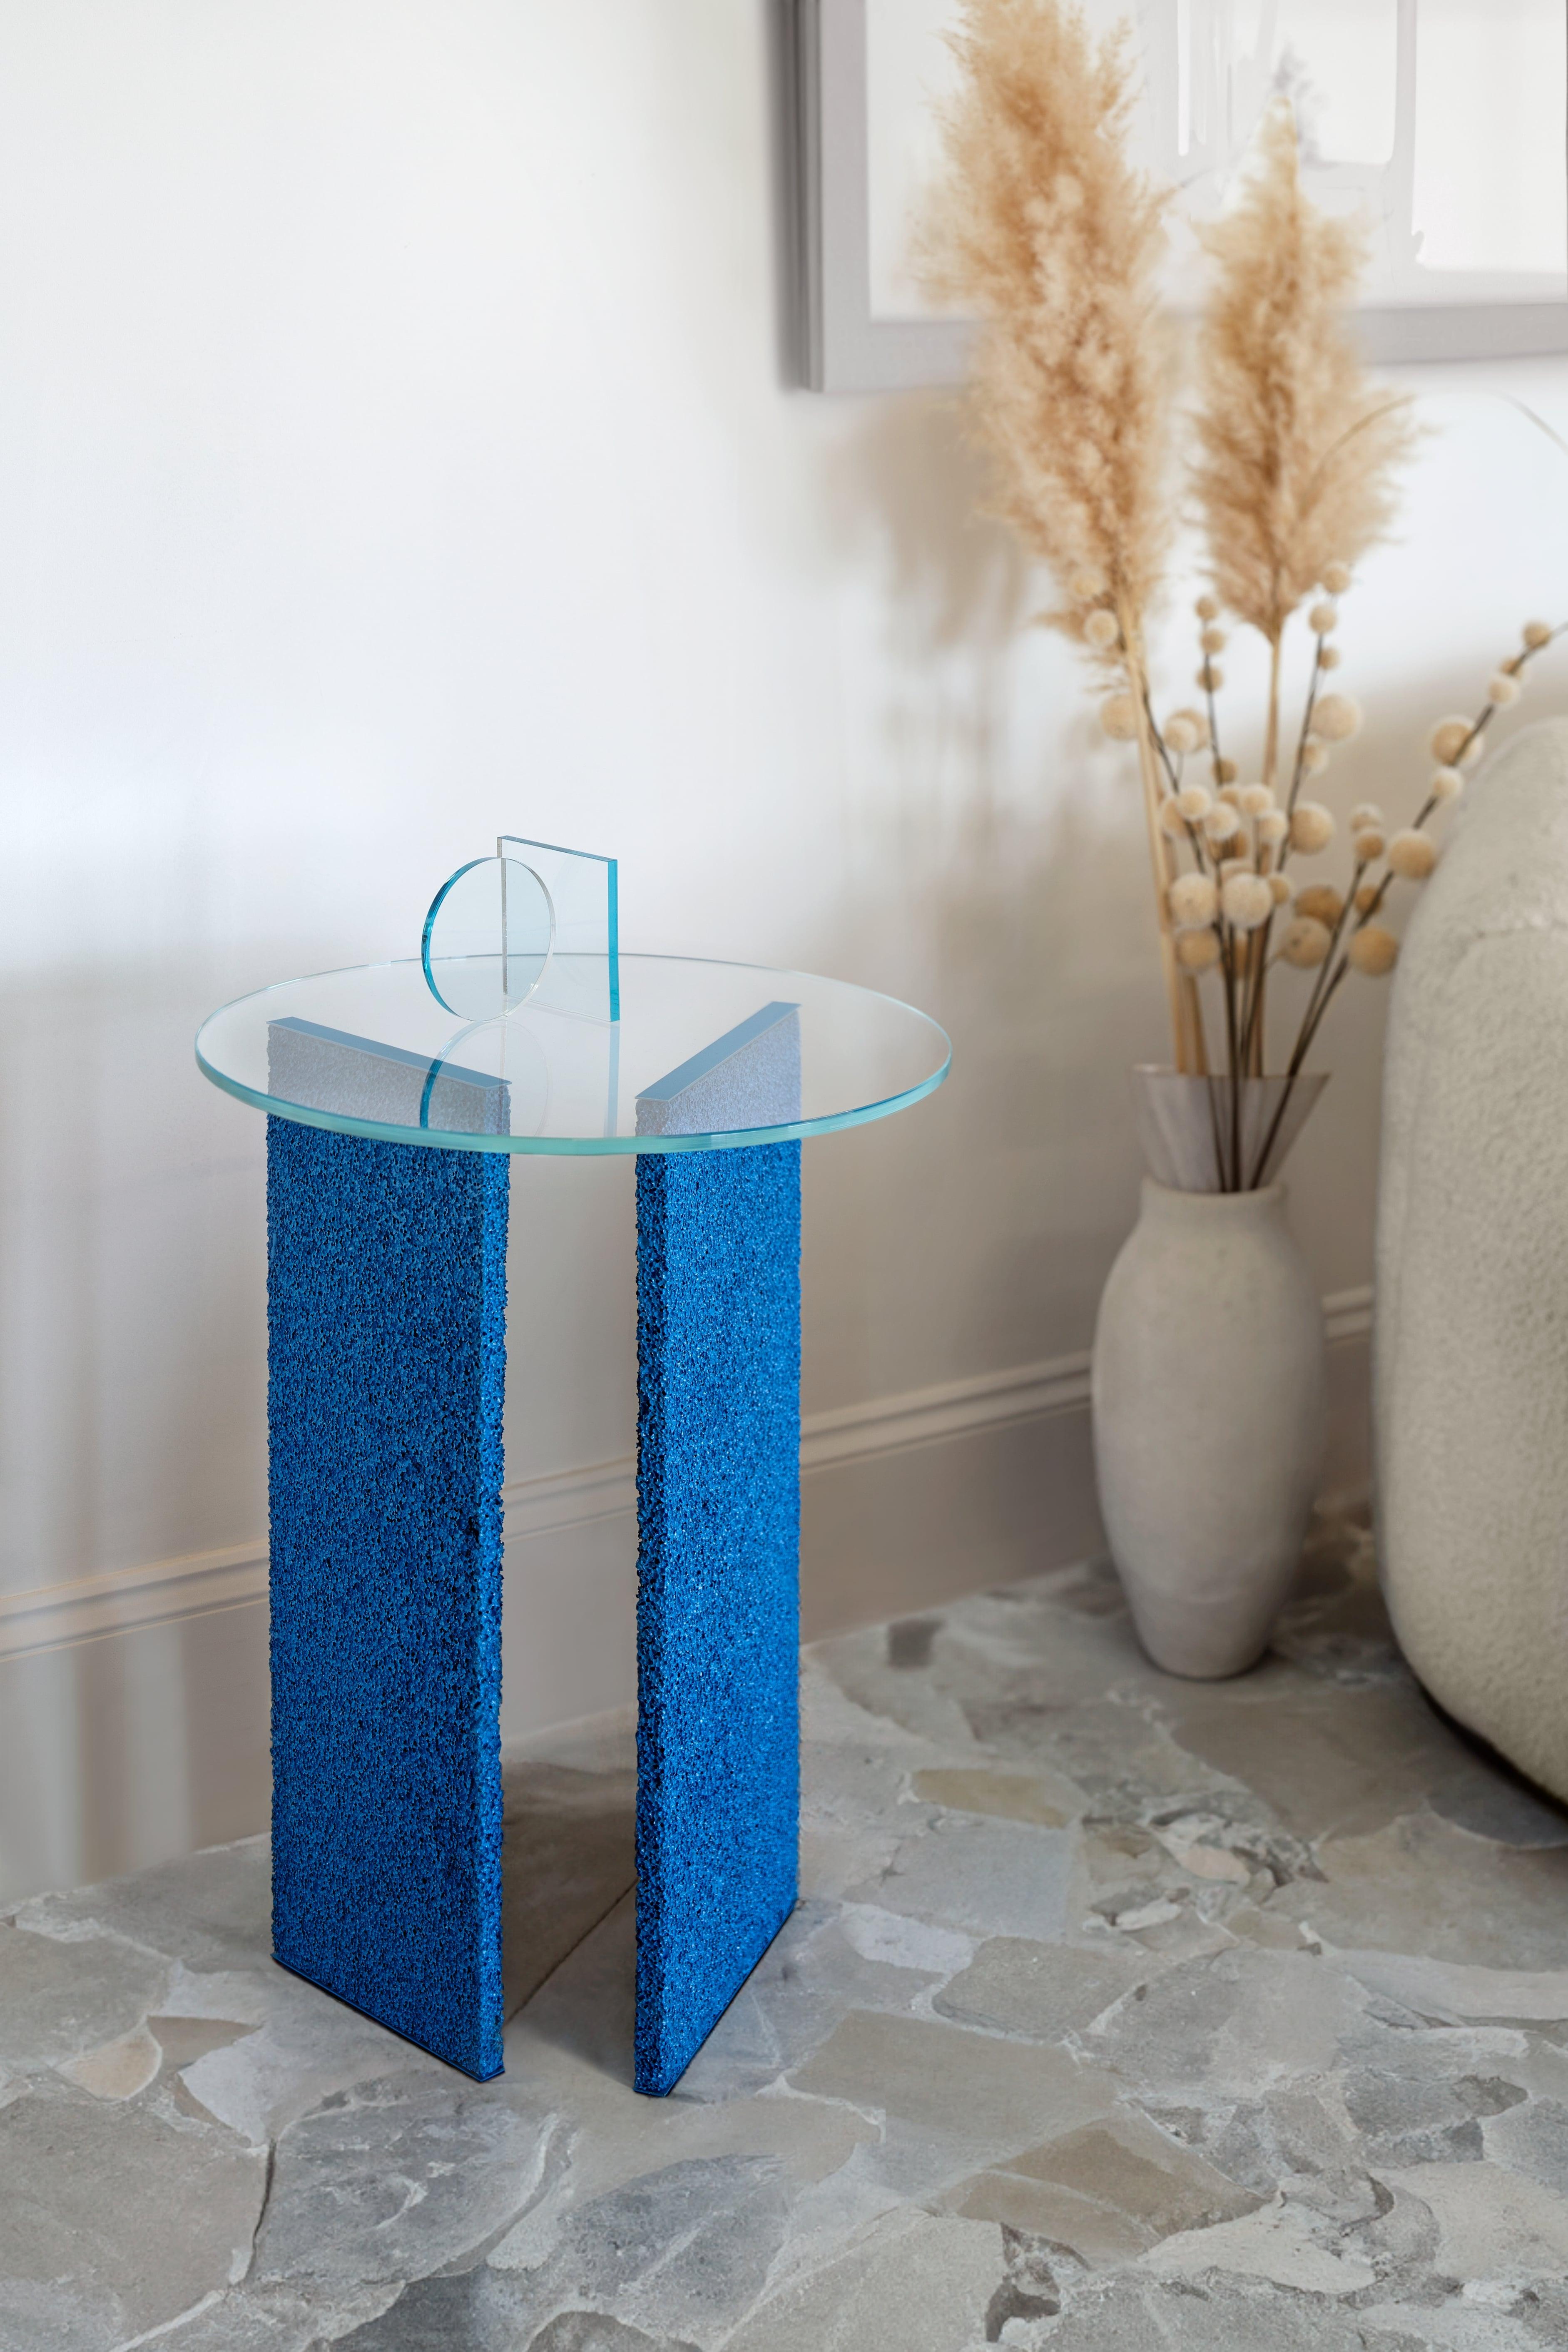 Jordan Keaney Studio is focused on bringing COLOUR and TEXTURE to your space. This side table is handcrafted by Jordan Keaney using a combination of modern digital and sculpting techniques, combined with classic casting and finishing, on top of